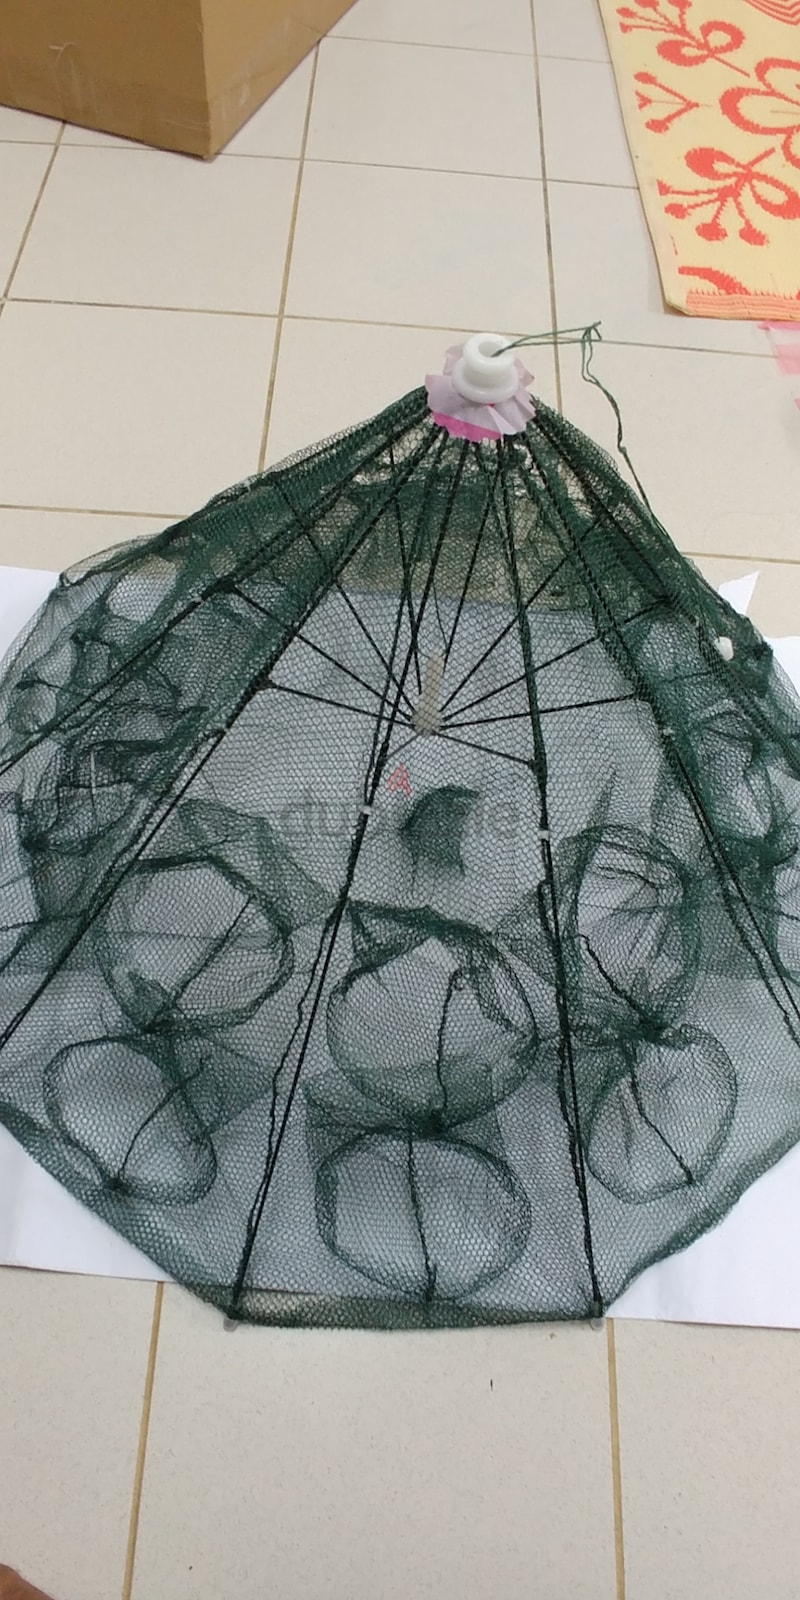 Buy fishing cast net material Online in UAE at Low Prices at